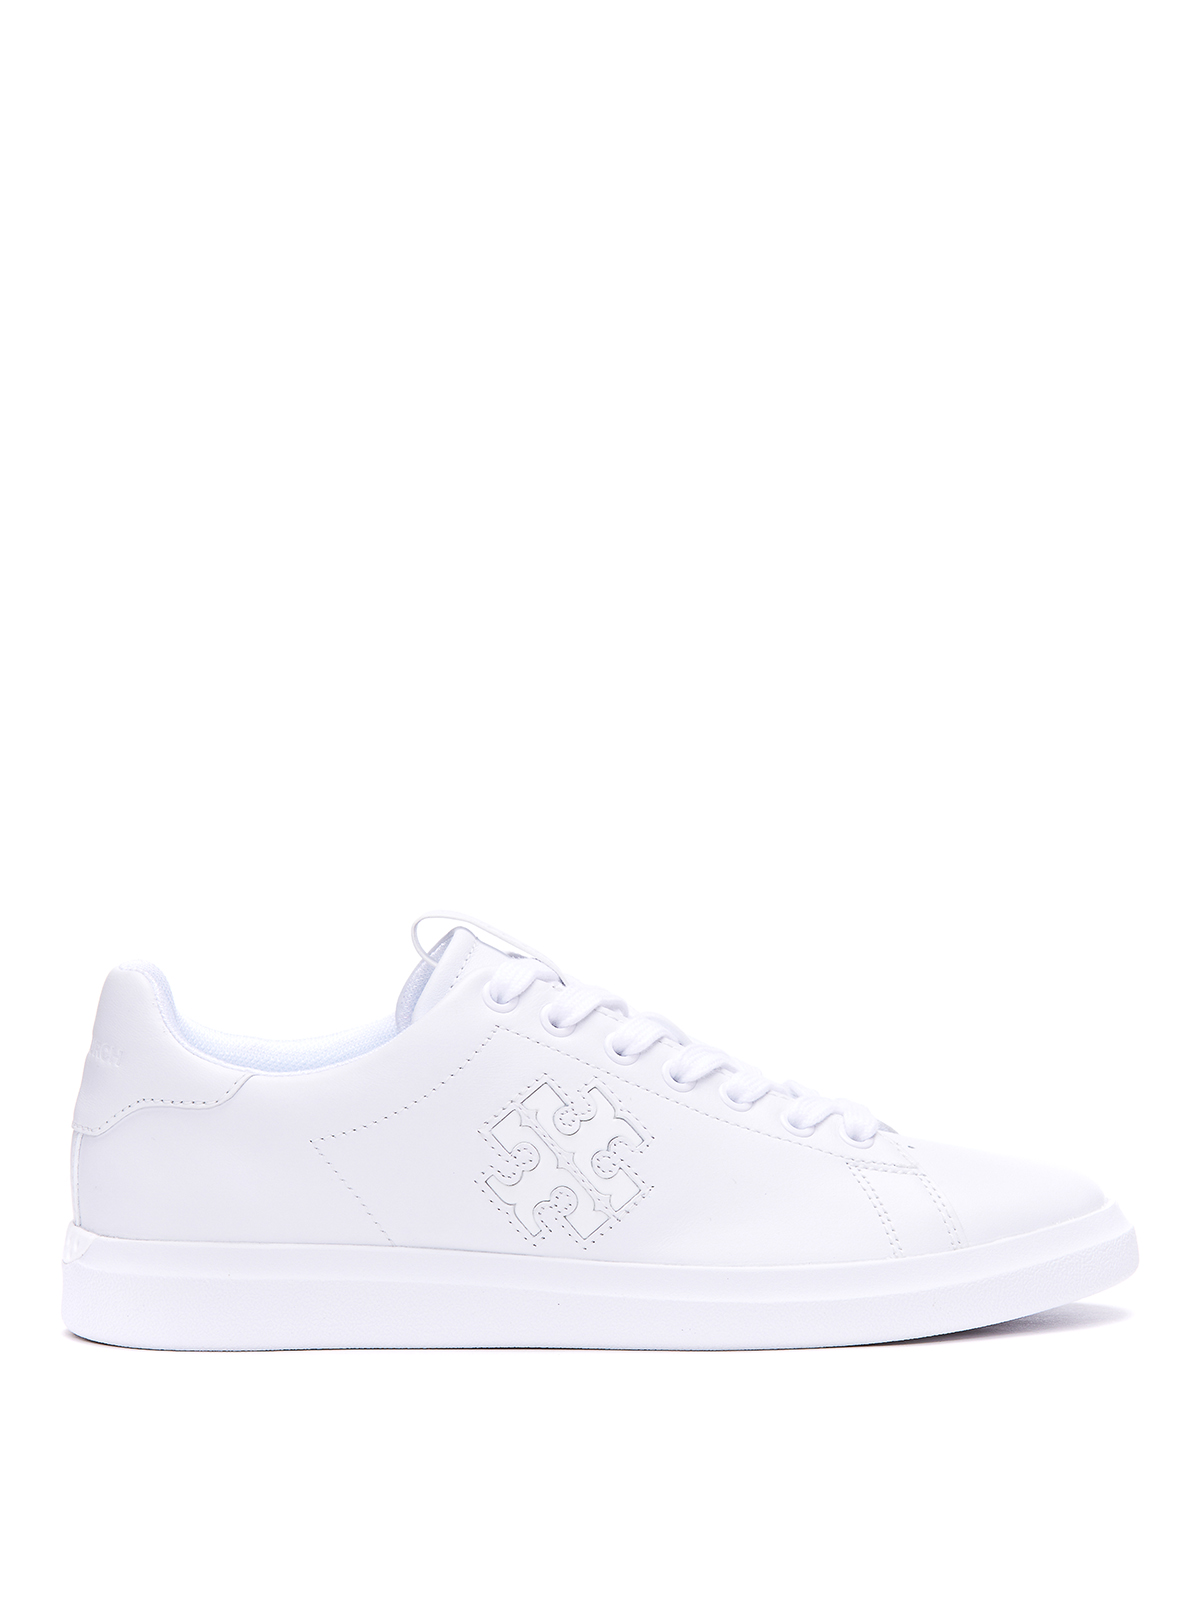 Tory Burch Logo Howell Trainers In White